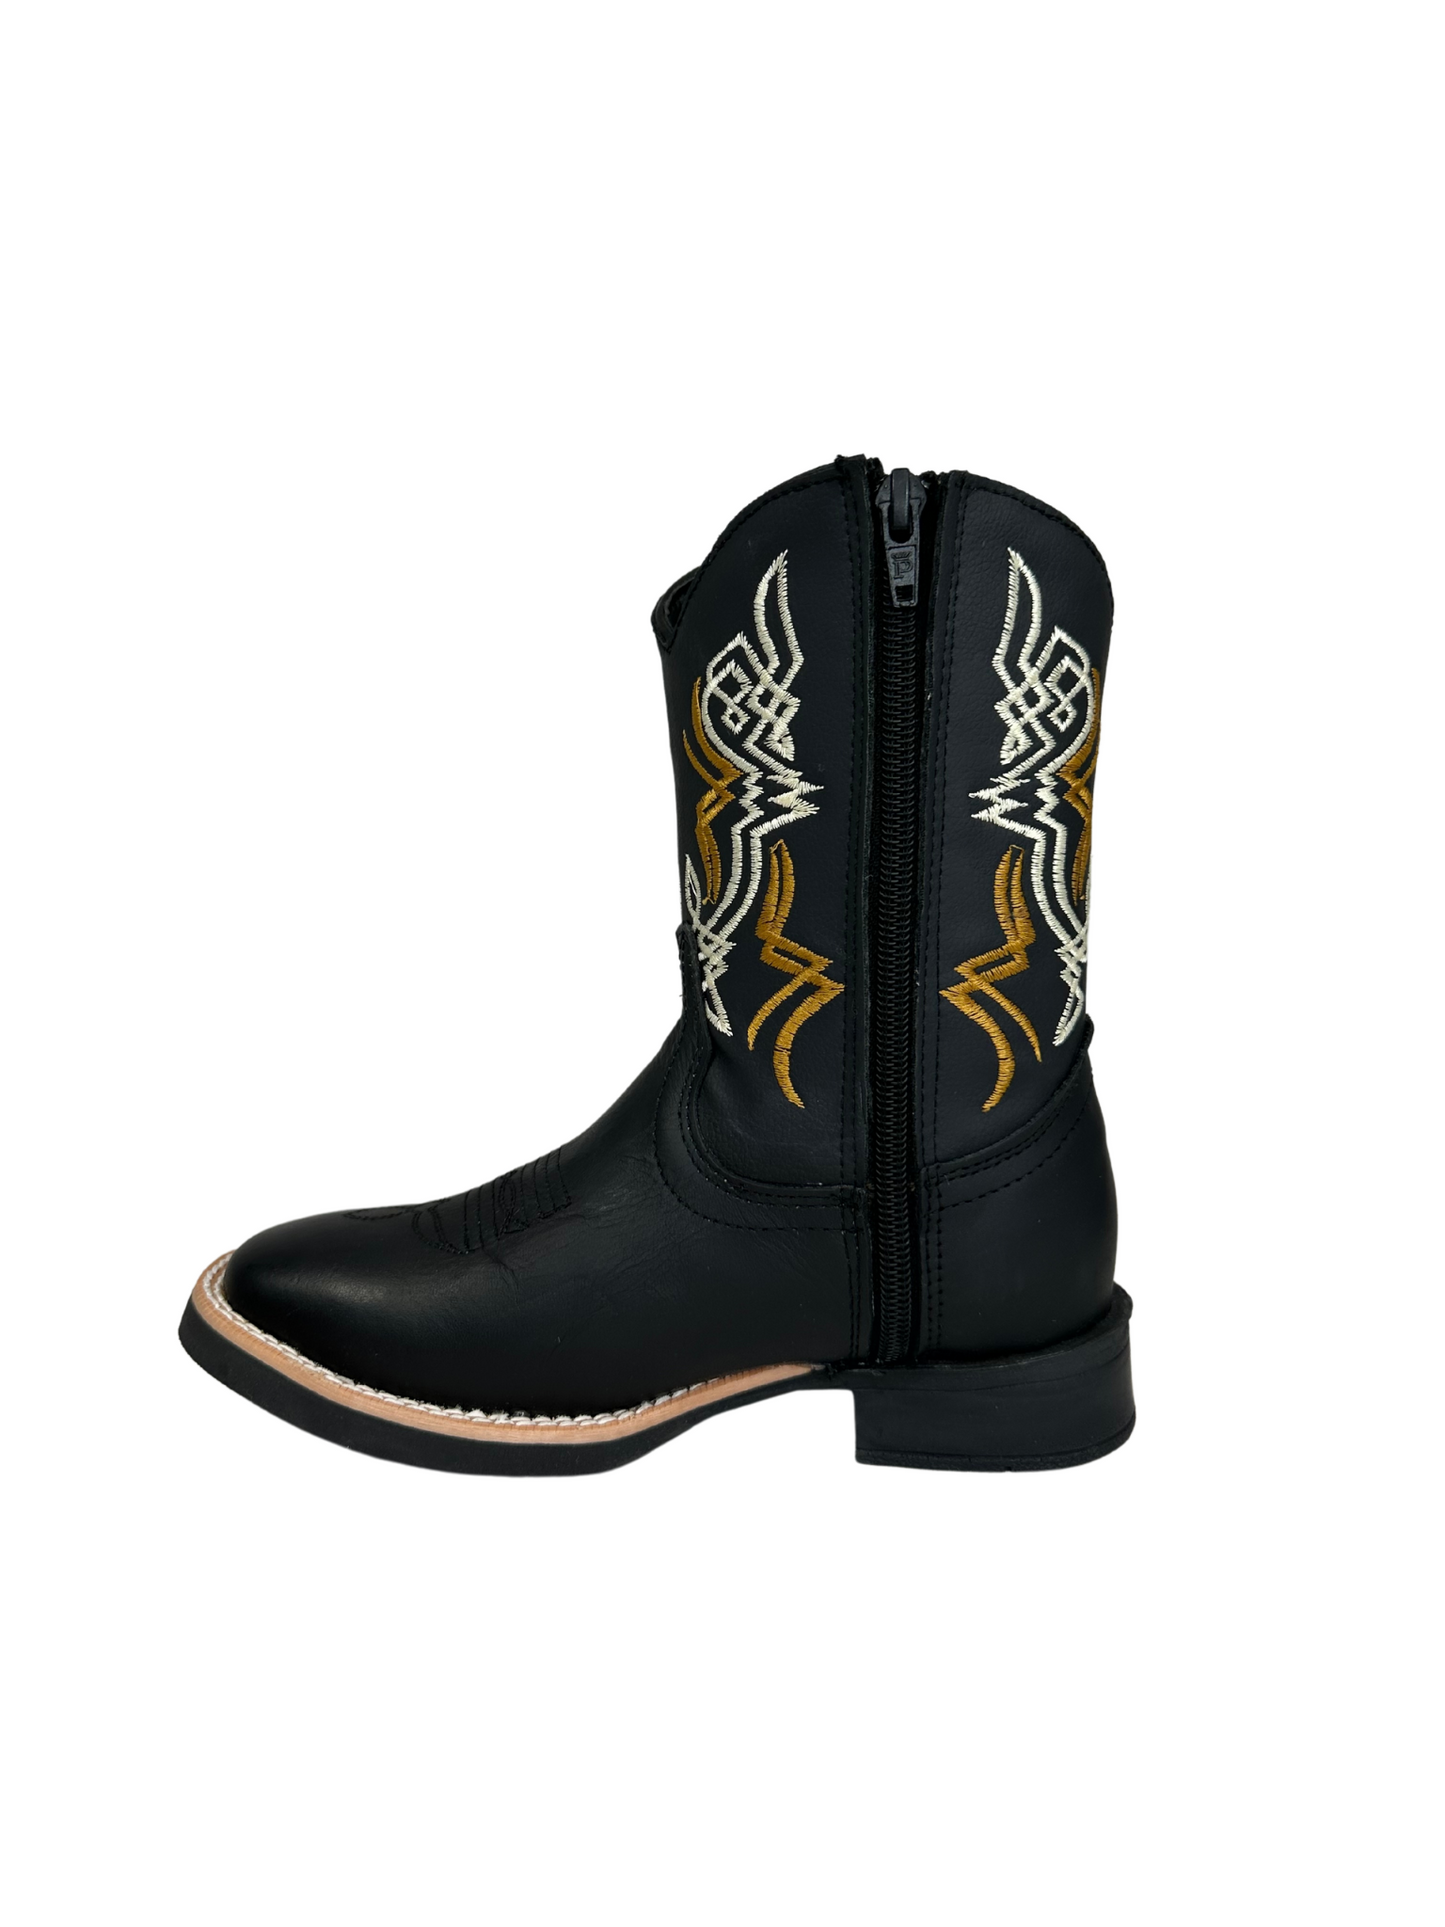 A&A Kid's Black Gold Stitched Boot